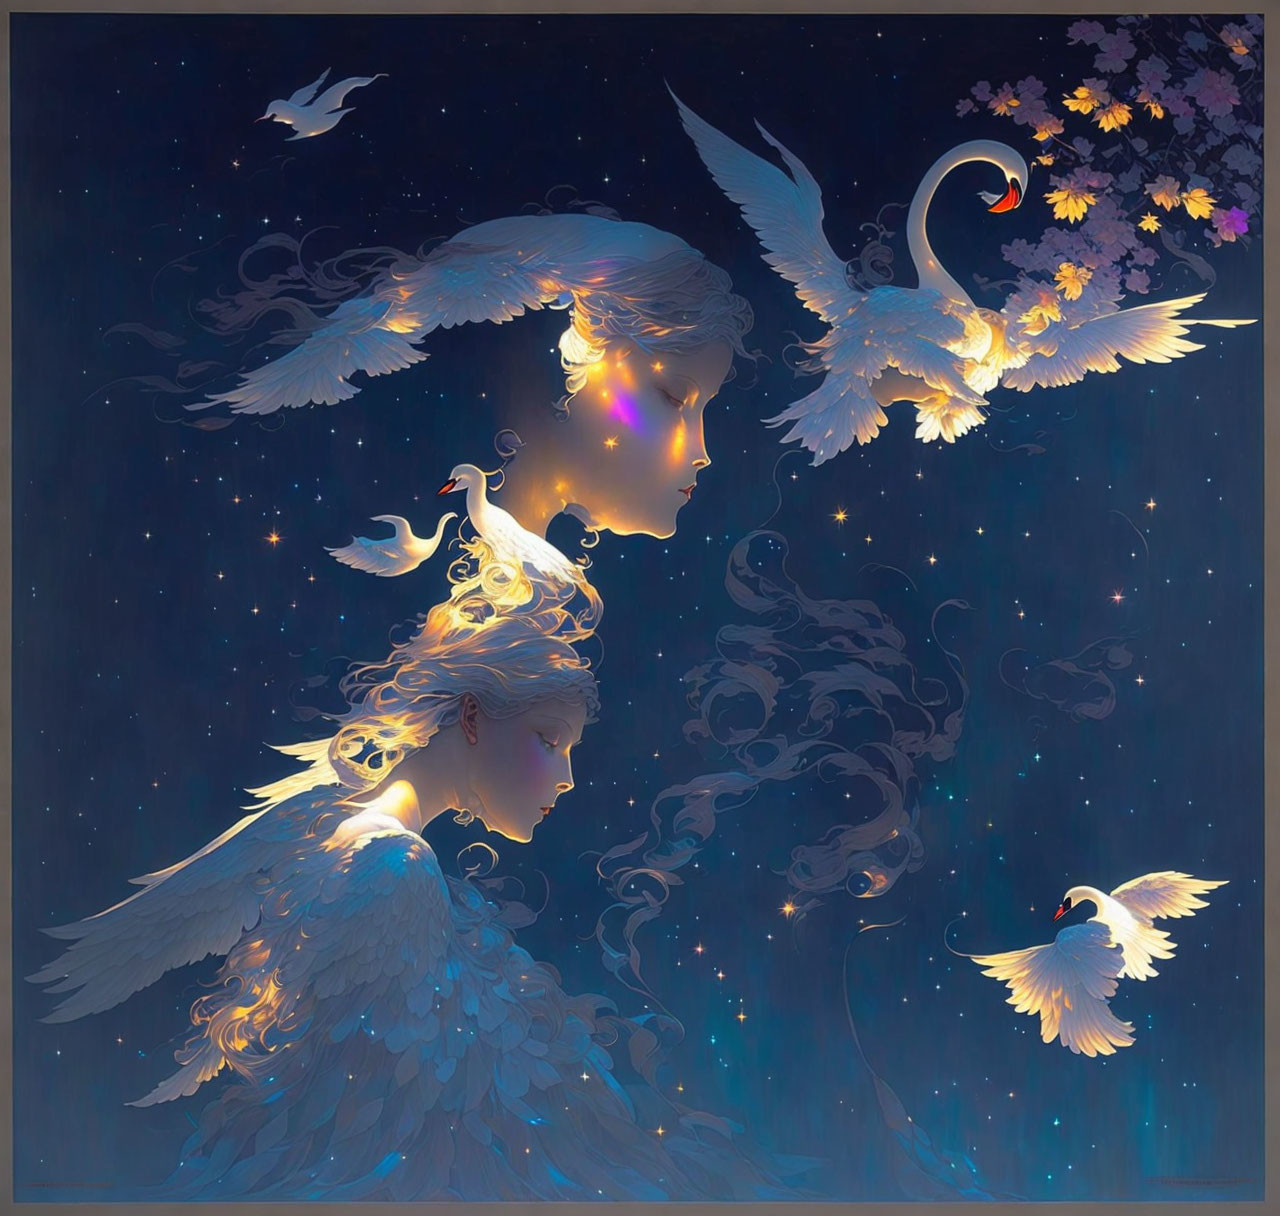 Ethereal illustration of angelic figures with ornate wings and luminescent birds